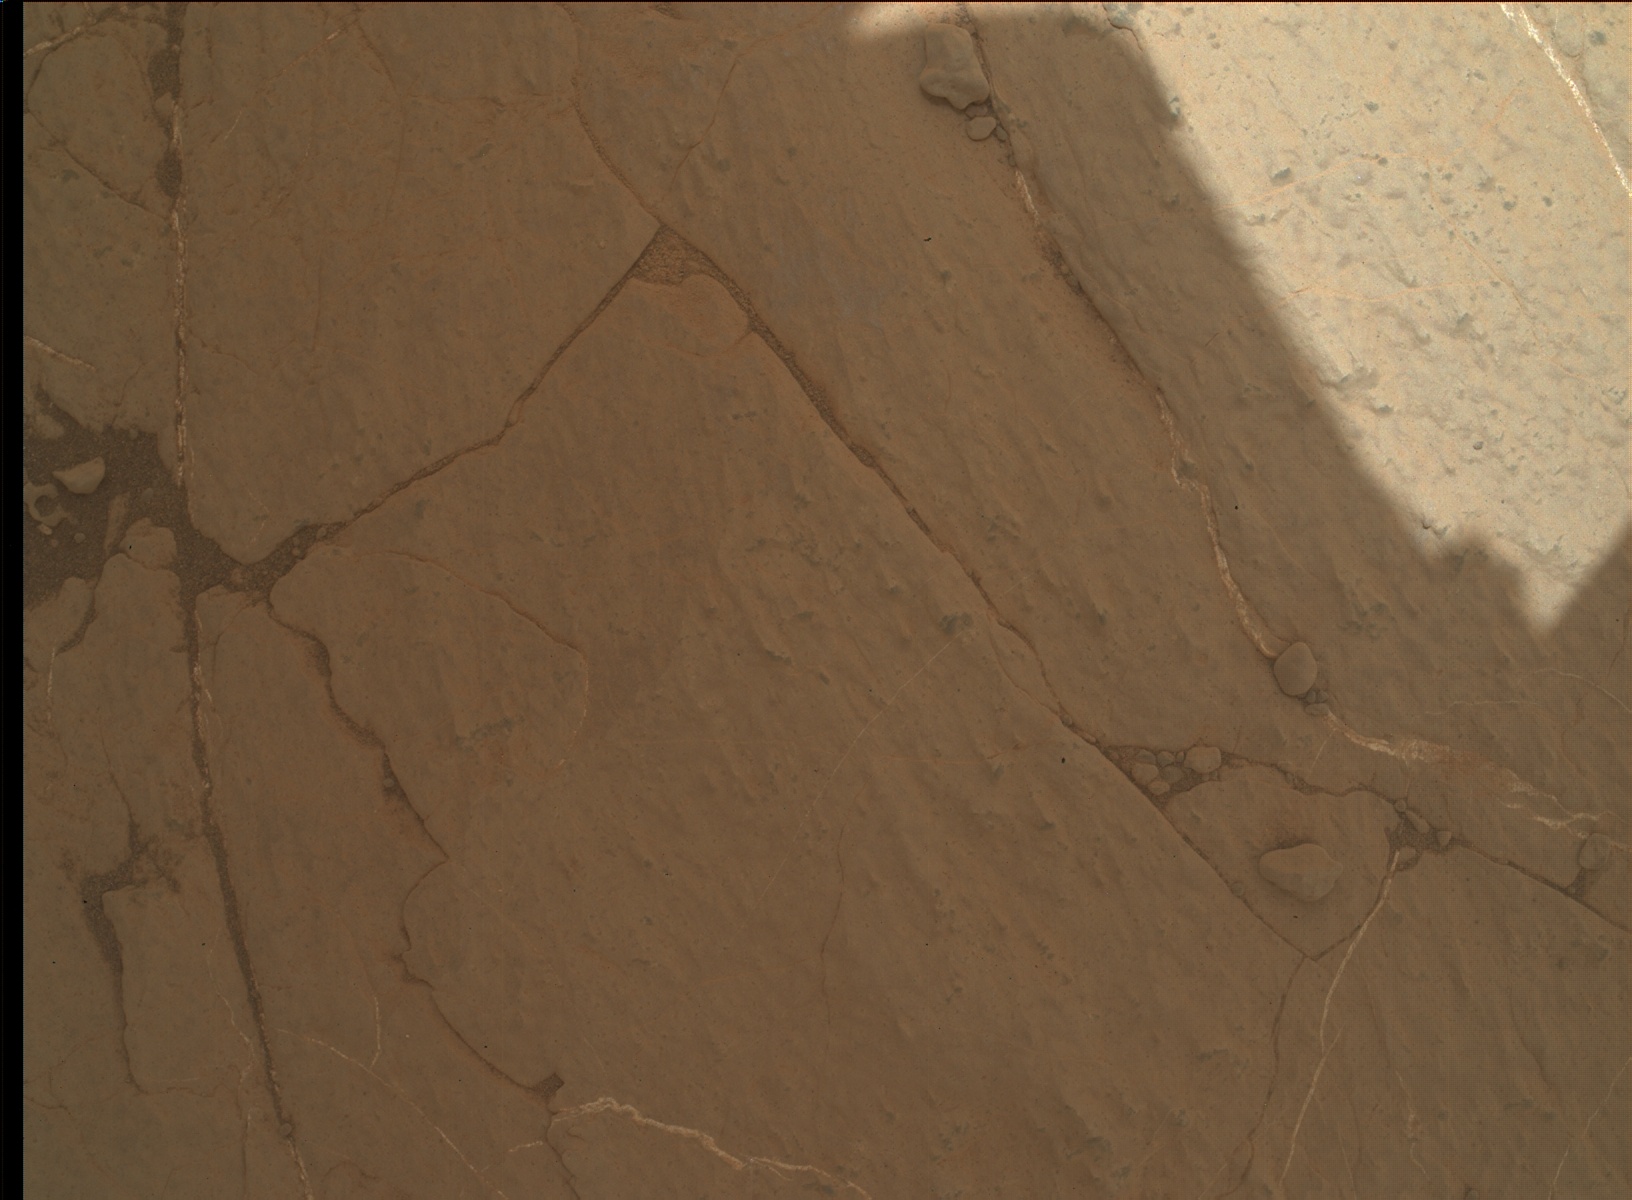 Nasa's Mars rover Curiosity acquired this image using its Mars Hand Lens Imager (MAHLI) on Sol 2754